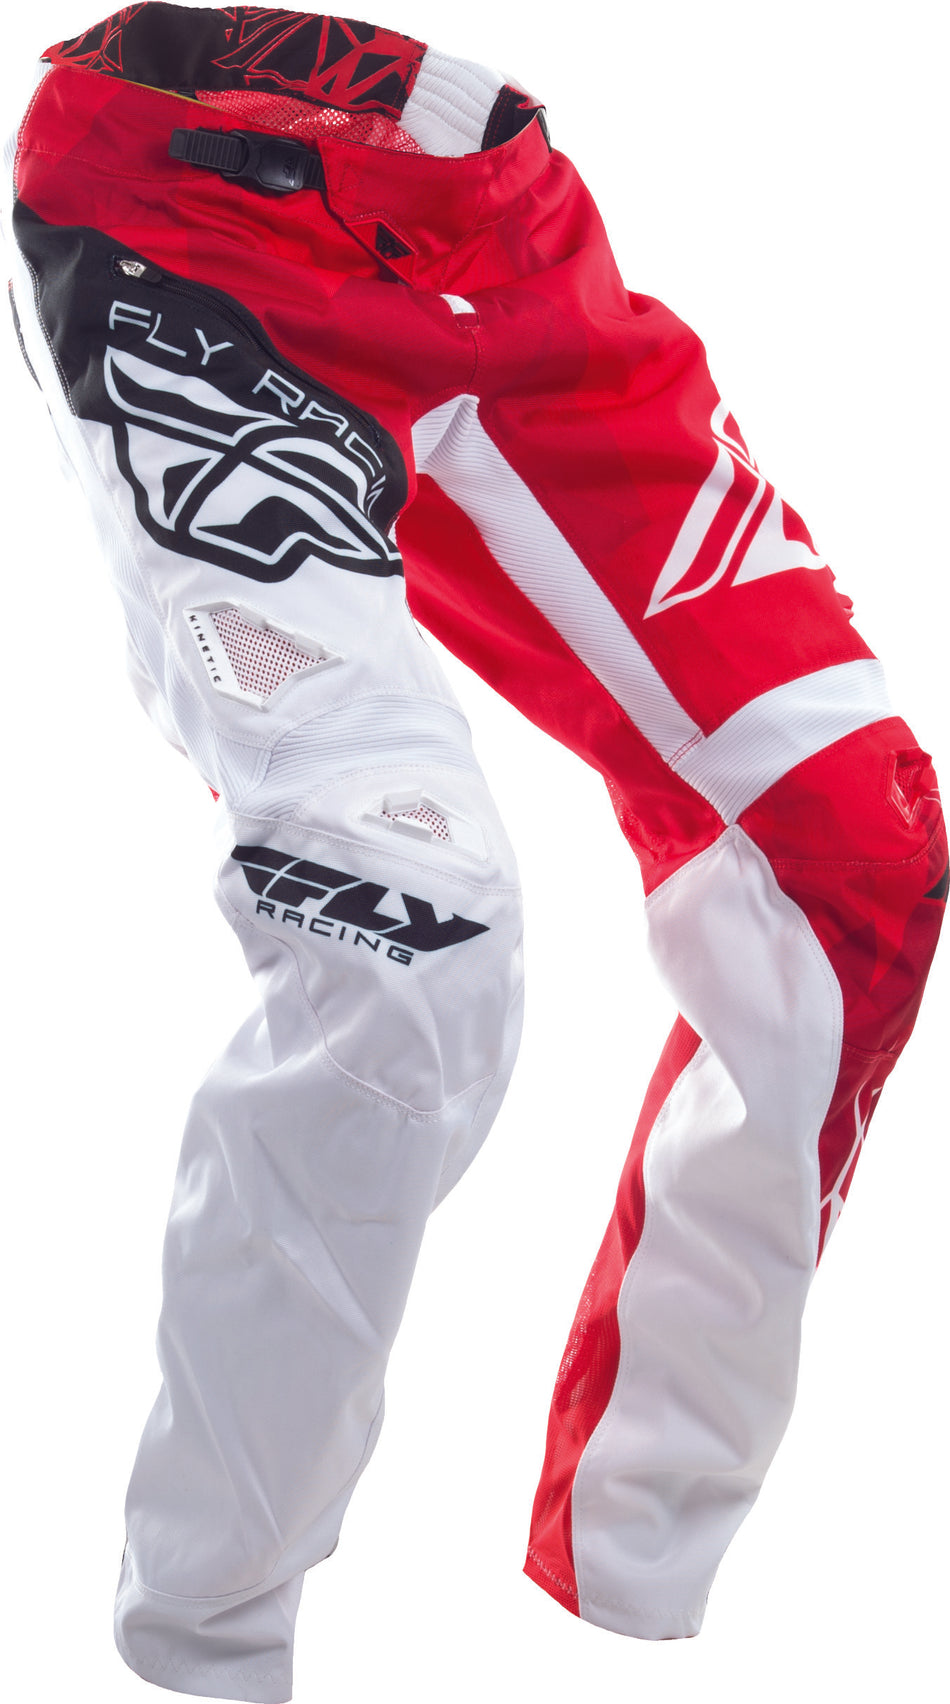 FLY RACING Bicycle Crux Pant Red/White Sz 22 370-02222